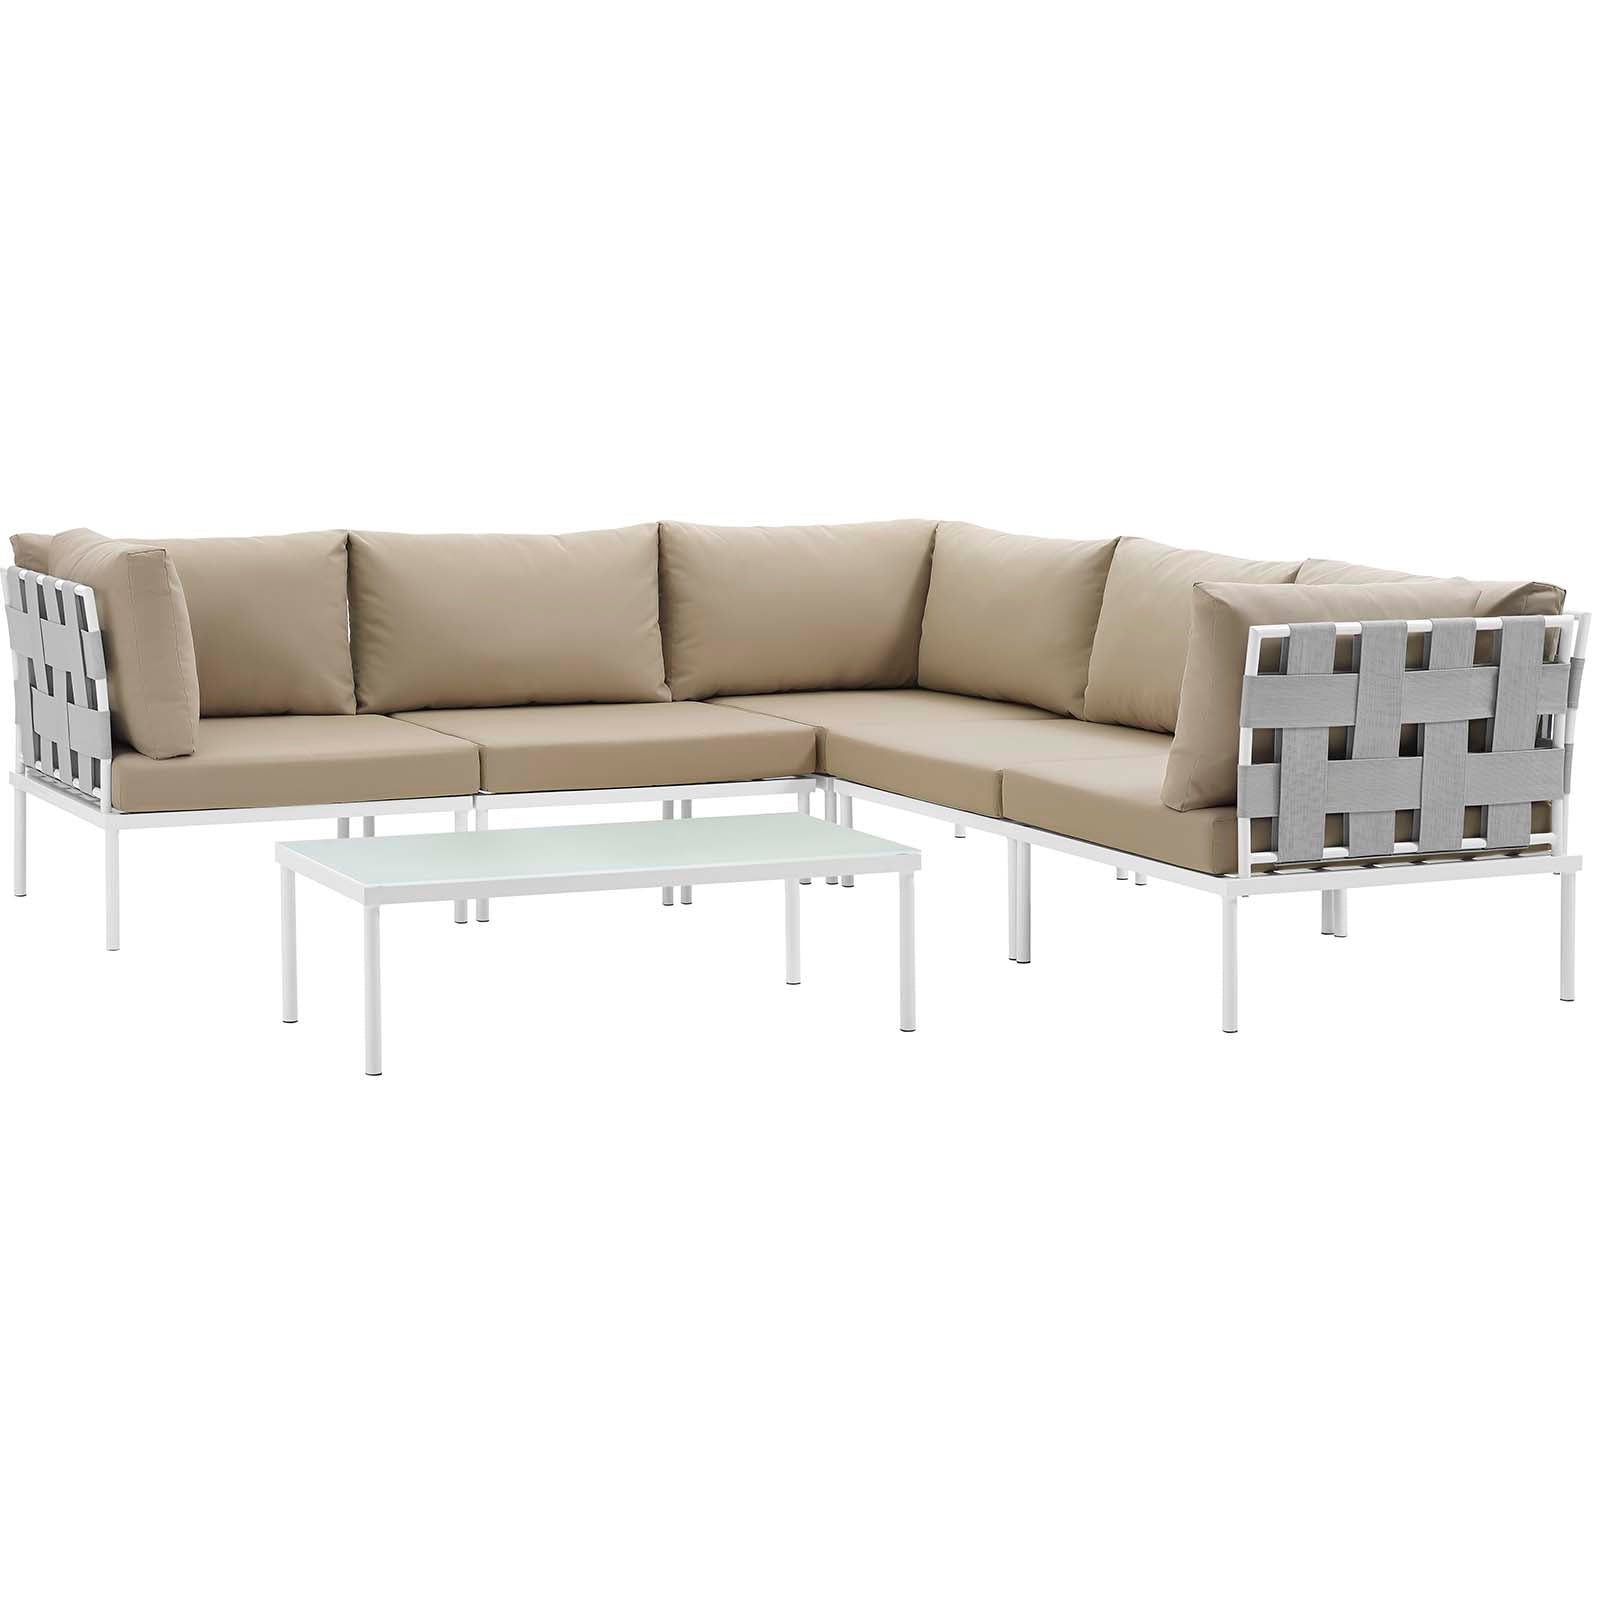 Modway Outdoor Conversation Sets - Harmony 6 Piece Outdoor 99"W Patio Aluminum Sectional Sofa Set Whit